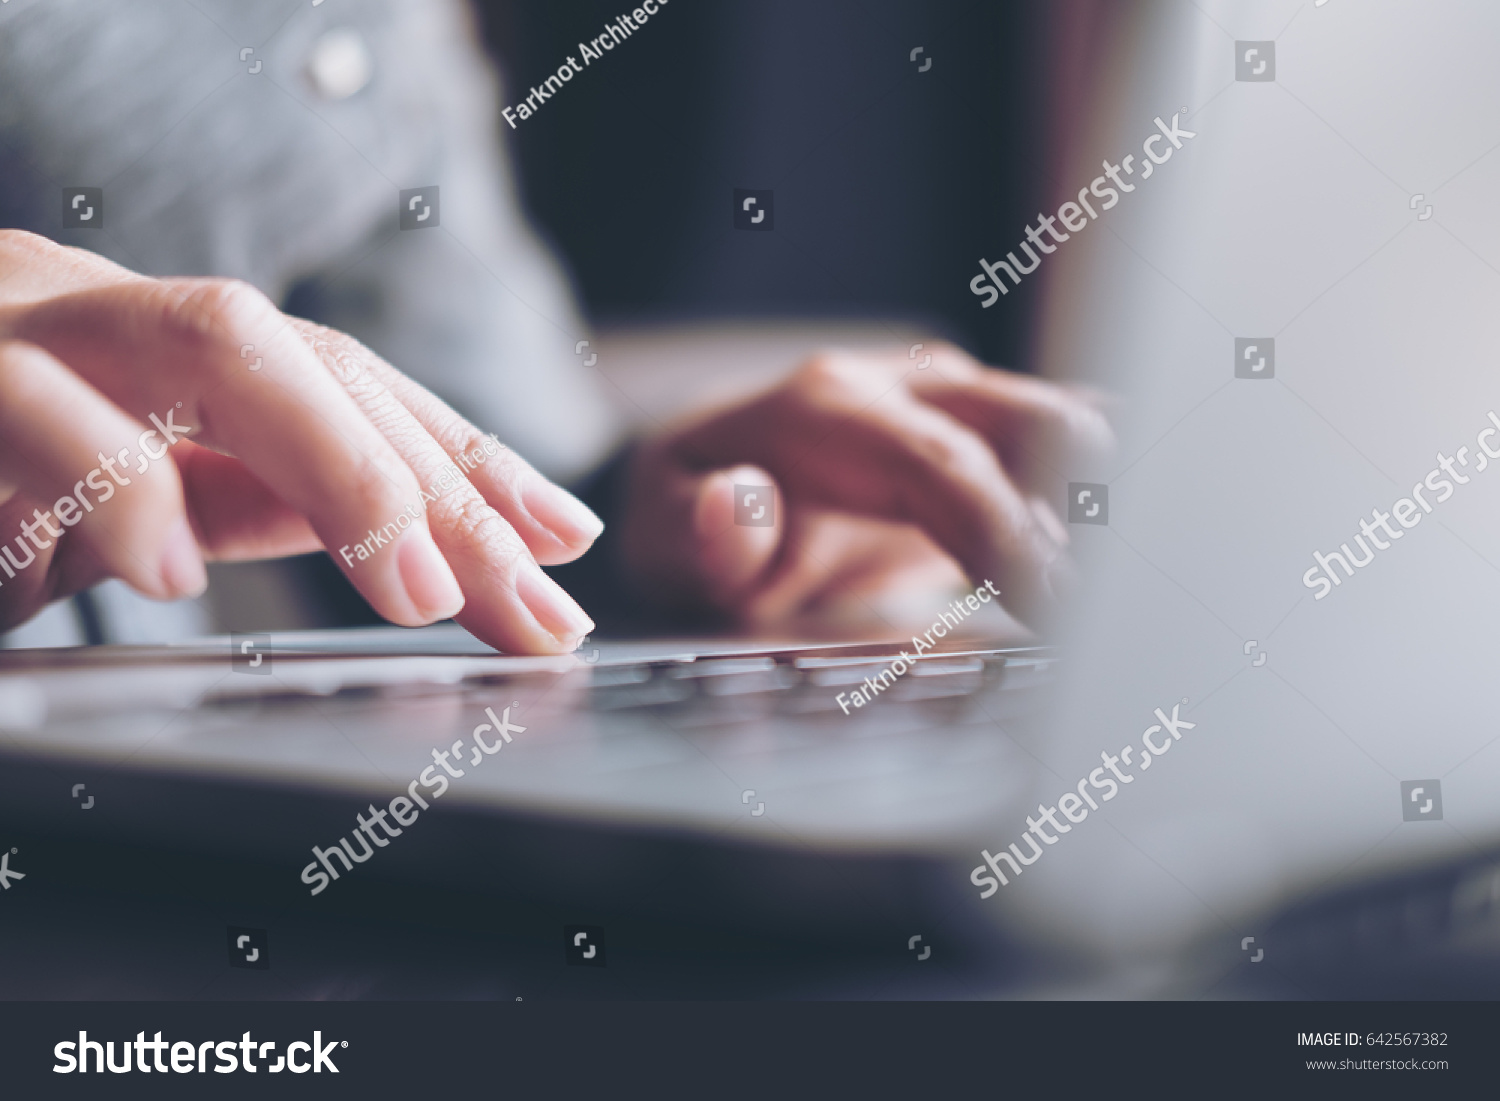 Closeup image of a business woman's hands working and typing on laptop keyboard on glass table #642567382